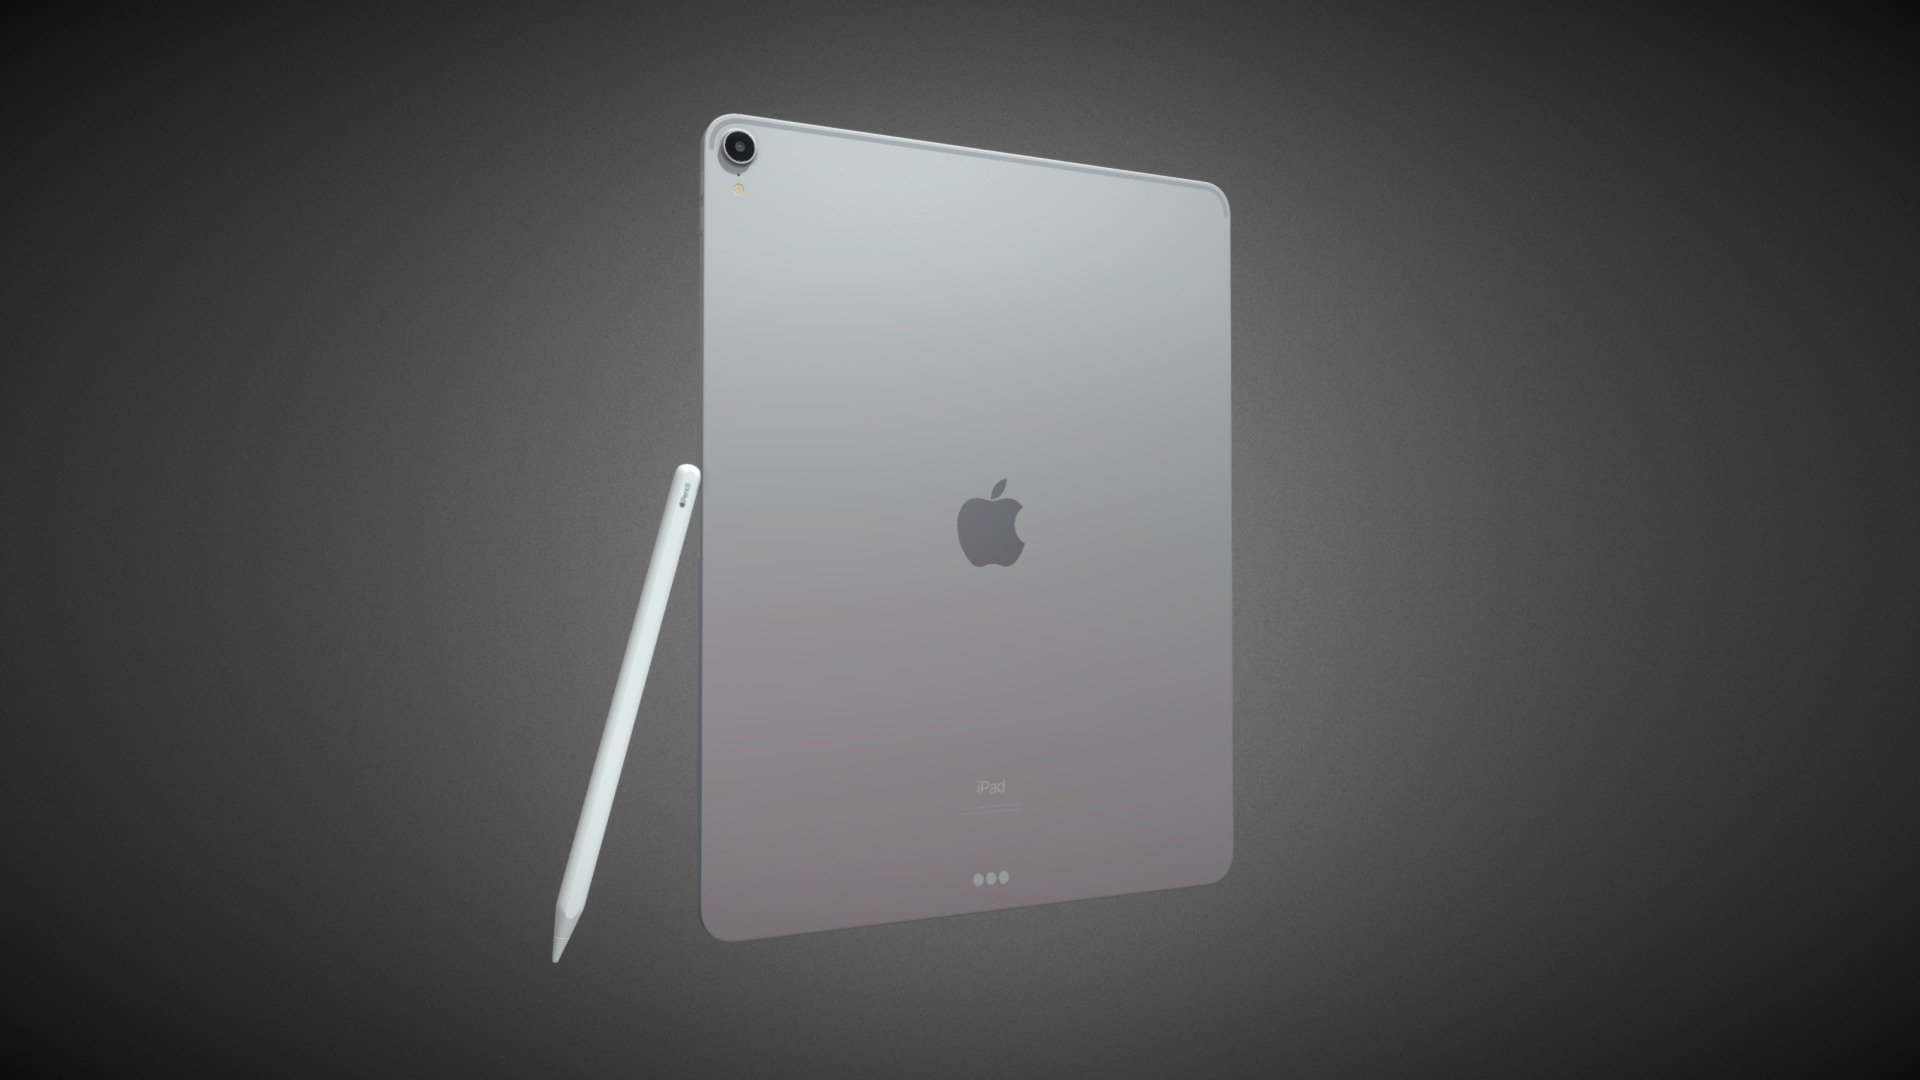 Realistic (copy) 3d model of Apple iPad Pro 12.9 inch Wi-Fi 2018 and New Apple Pencil.




iPad Pro 12.9 inch Silver Wi-Fi

iPad Pro 12.9 inch Space Gray Wi-Fi

New Apple Pencil

This set:
3D element v2.2
The model given is easy to use
- 1 file obj standard
- 1 file 3ds Max 2013 vray material 
- 1 file 3ds Max 2013 corona material
- 1 file of 3Ds
- 1 file e3d full set of materials, like a preview

Topology of geometry:




forms and proportions of The 3D model

the geometry of the model was created very neatly

there are no many-sided polygons

detailed enough for close-up renders

the model optimized for turbosmooth modifier

Not collapsed the turbosmooth modified

apply the Smooth modifier with a parameter to get the desired level of detail

Organization of scene:




to all objects and materials

real world size (system units - mm)

coordinates of location of the model in space (x0, y0, z0)

does not contain extraneous or hidden objects (lights, cameras, shapes etc.)
 - Apple iPad Pro 12-9 inch Wi-Fi 2018 - Buy Royalty Free 3D model by madMIX 3d model